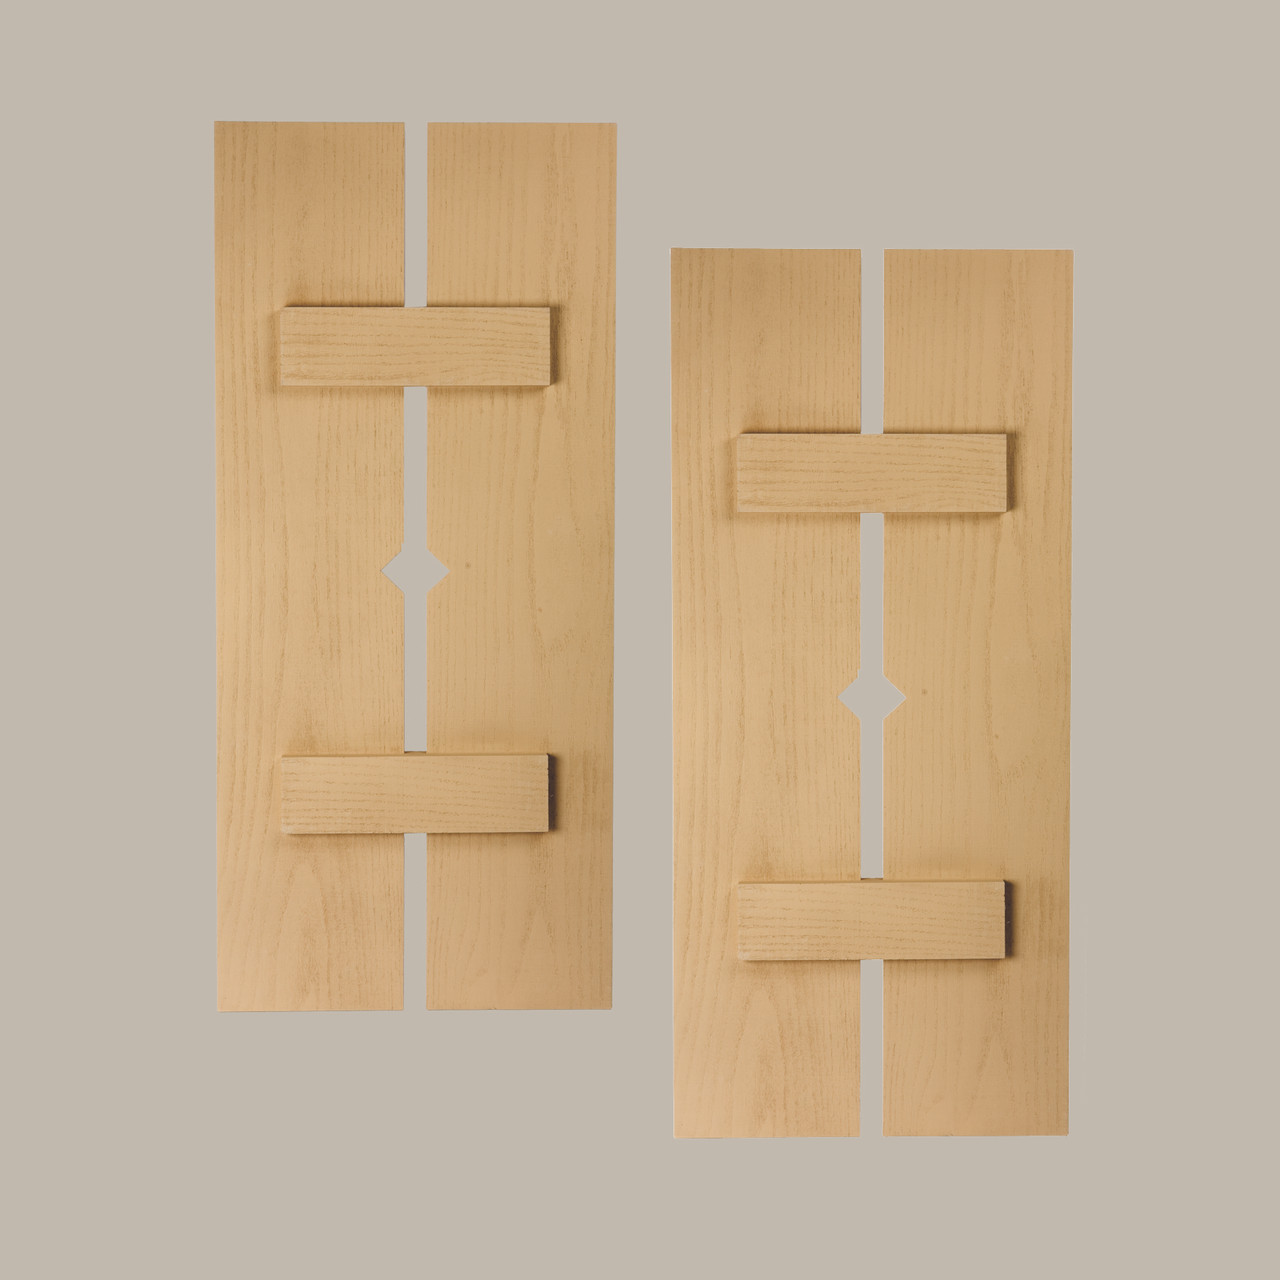 12 inch by 65 inch Plank Shutter with 2-Plank, Diamond